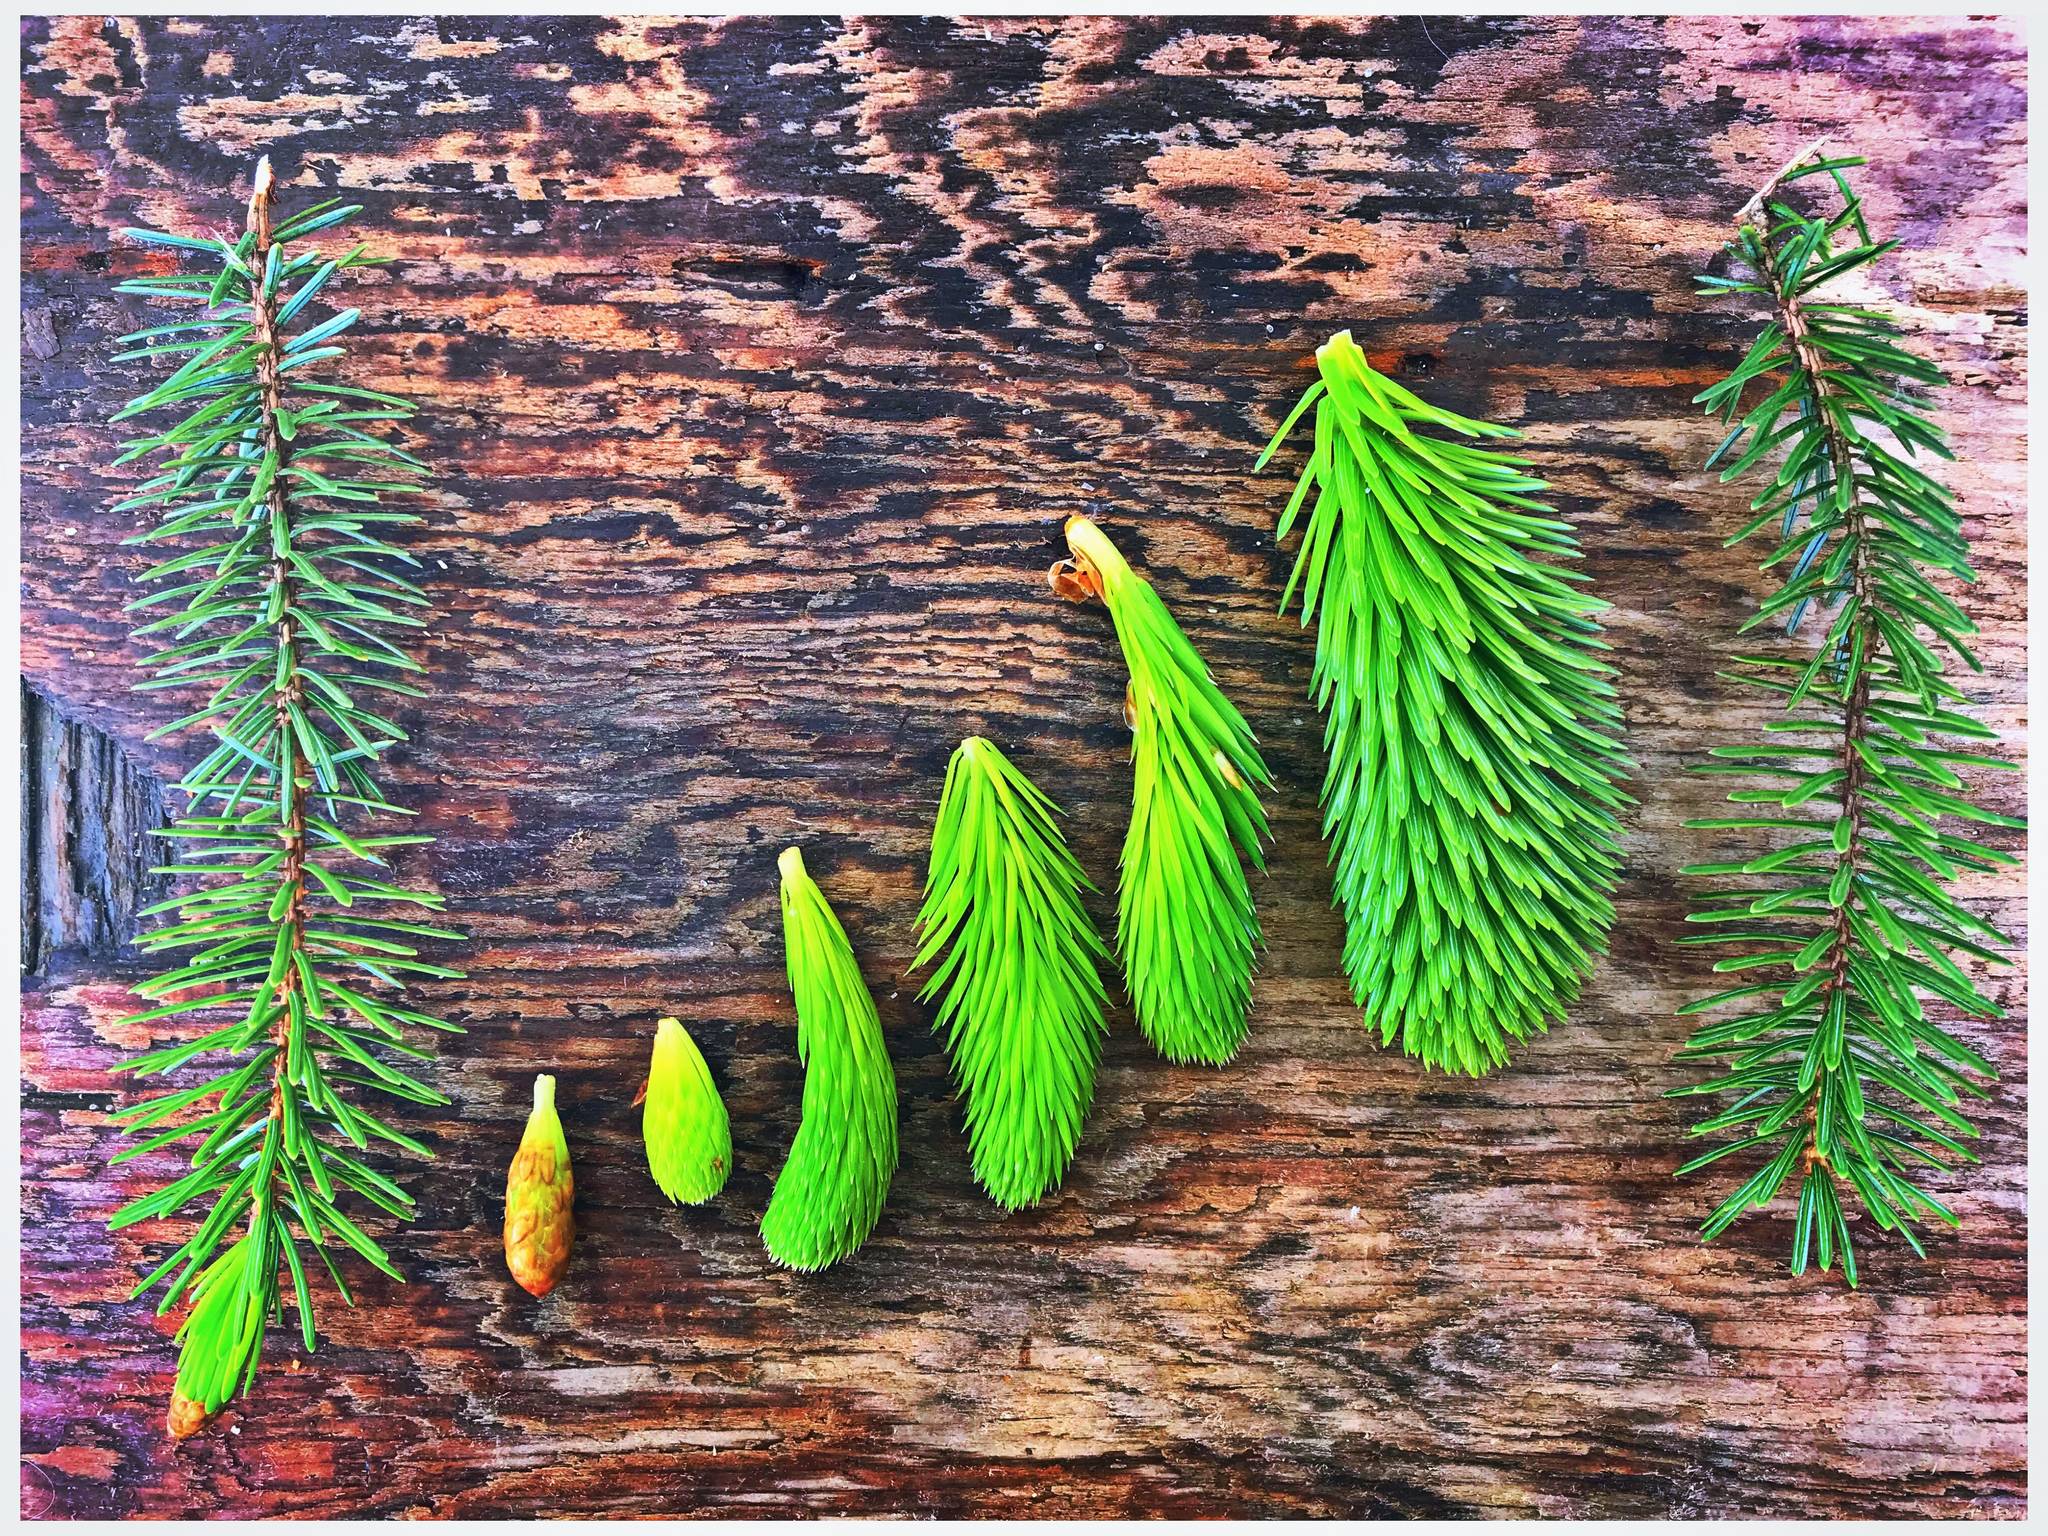 Spruce tip stages. Vivian Faith Prescott | For the Capital City Weekly